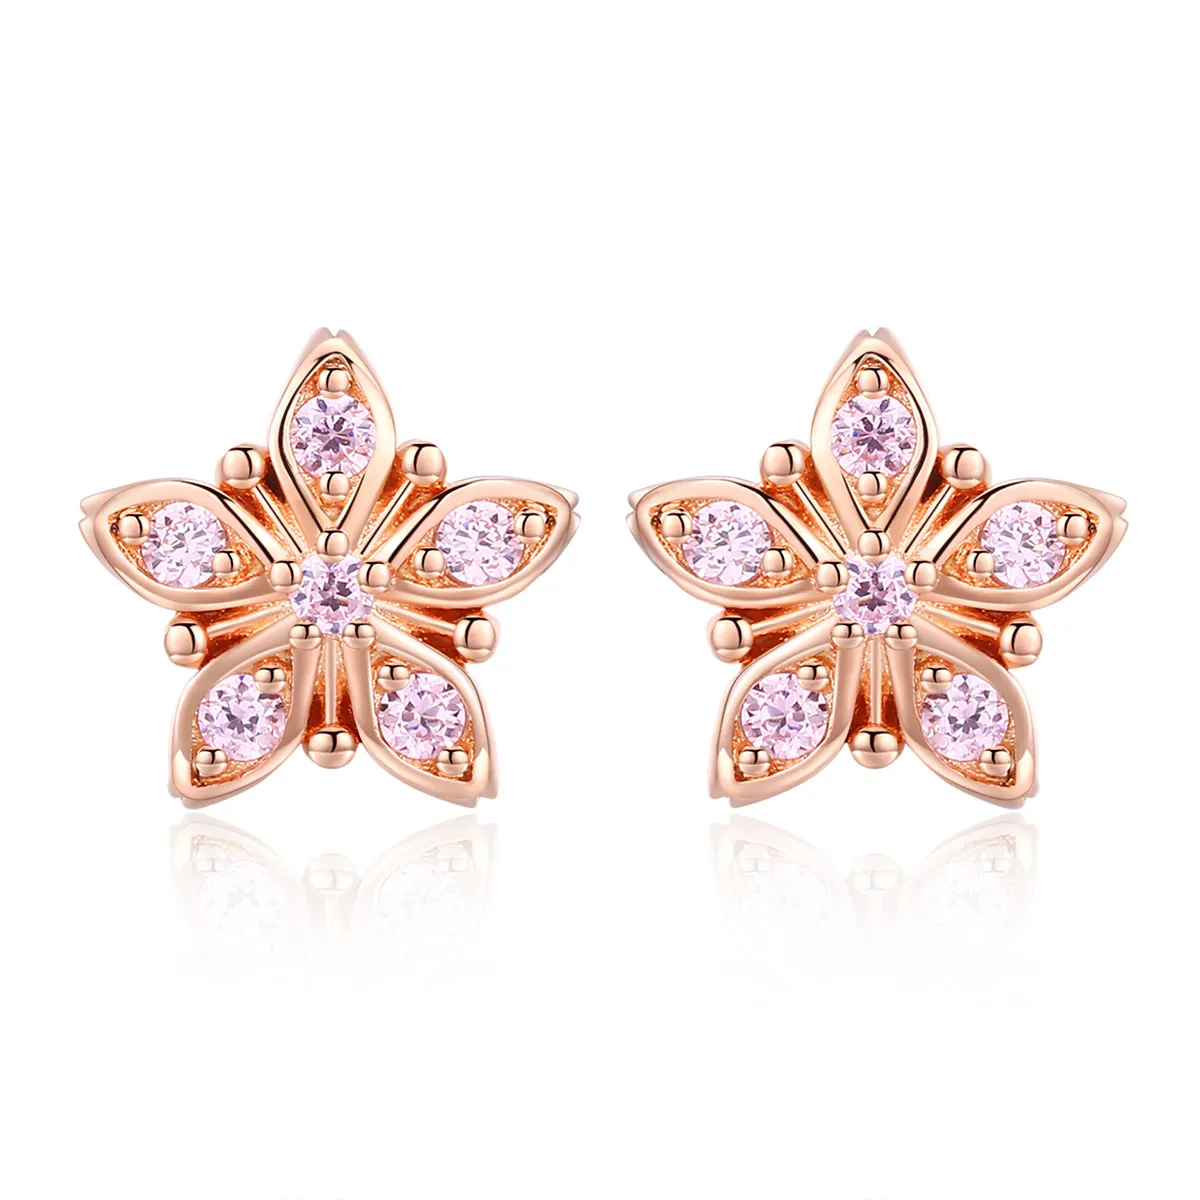 Pandora Style Rose Gold Pink Daisy Stud Earrings - BSE034